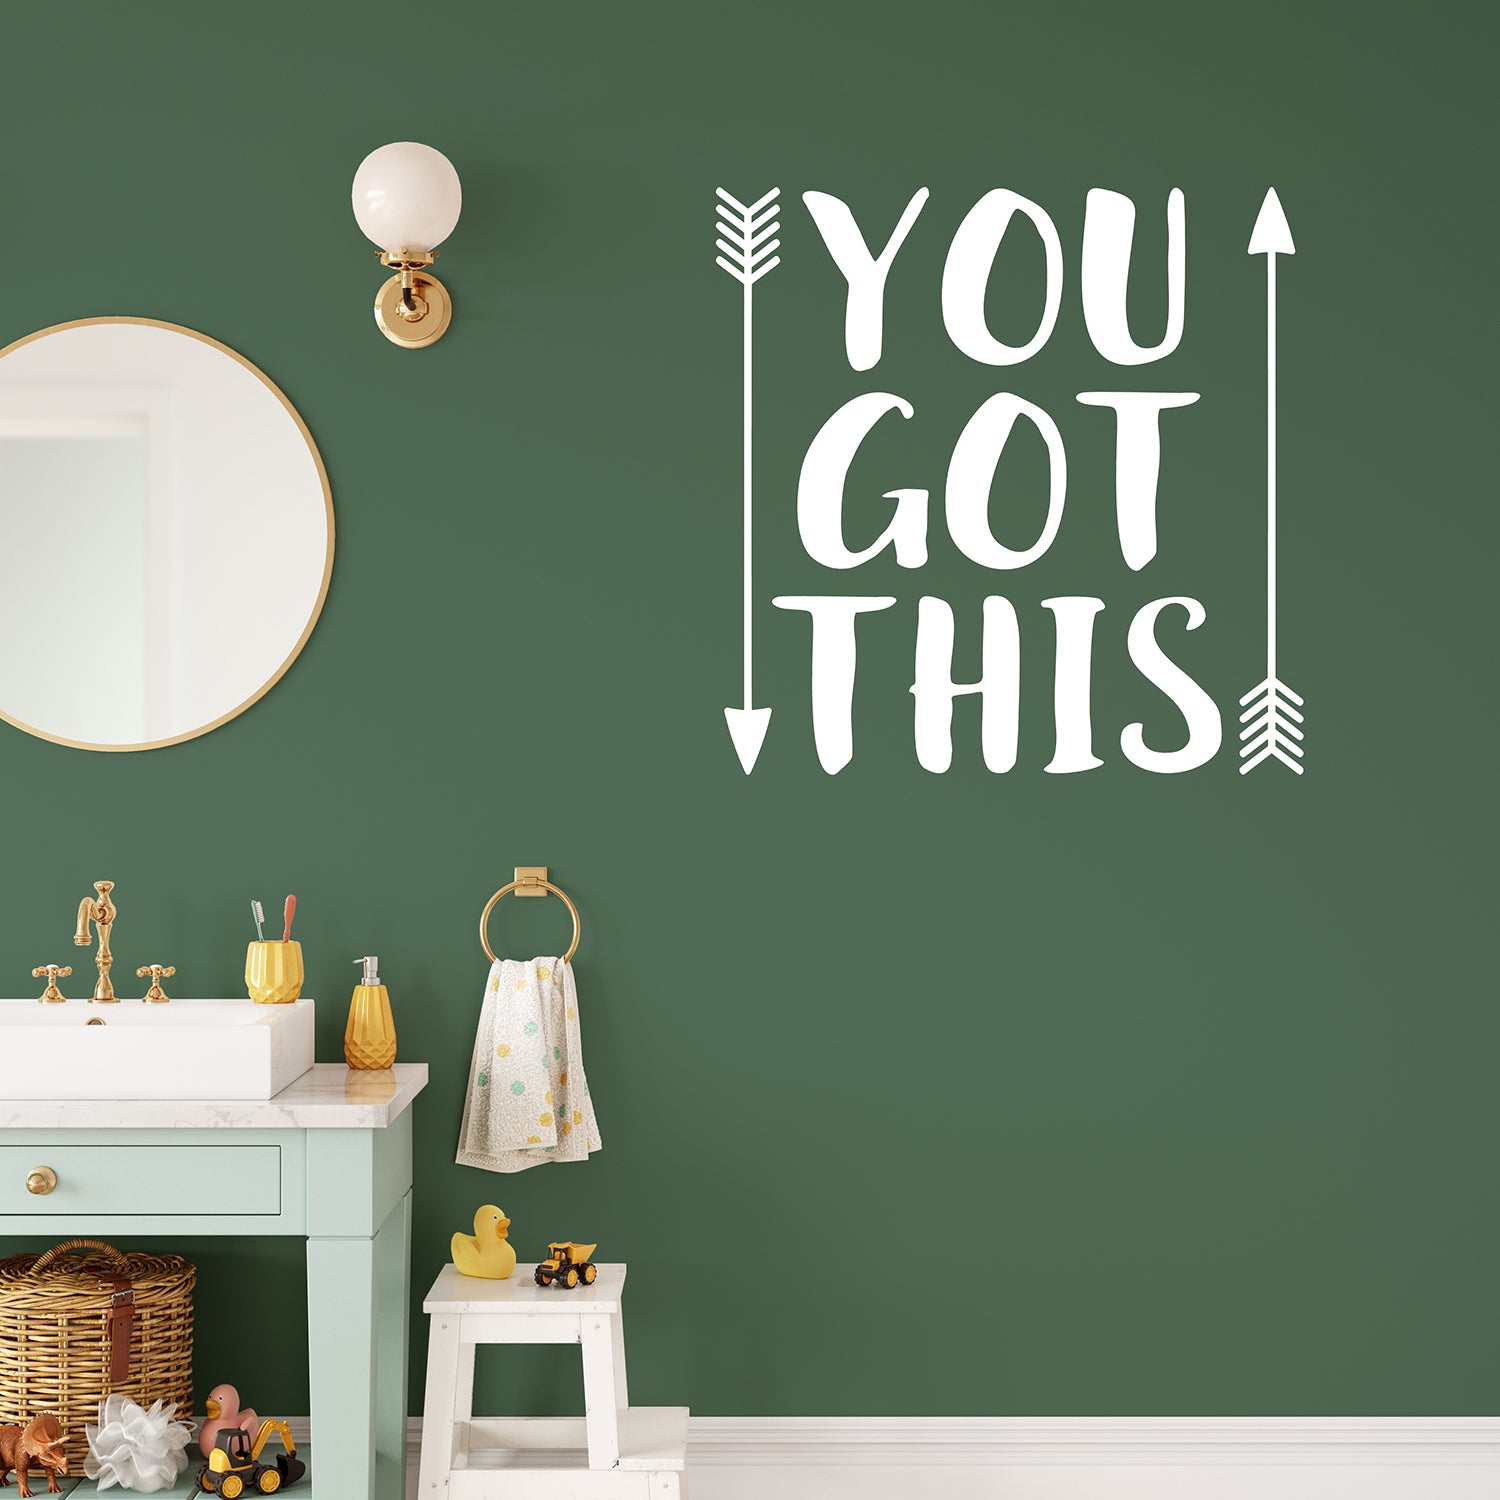 You got this | Wall quote-Wall quote-Adnil Creations